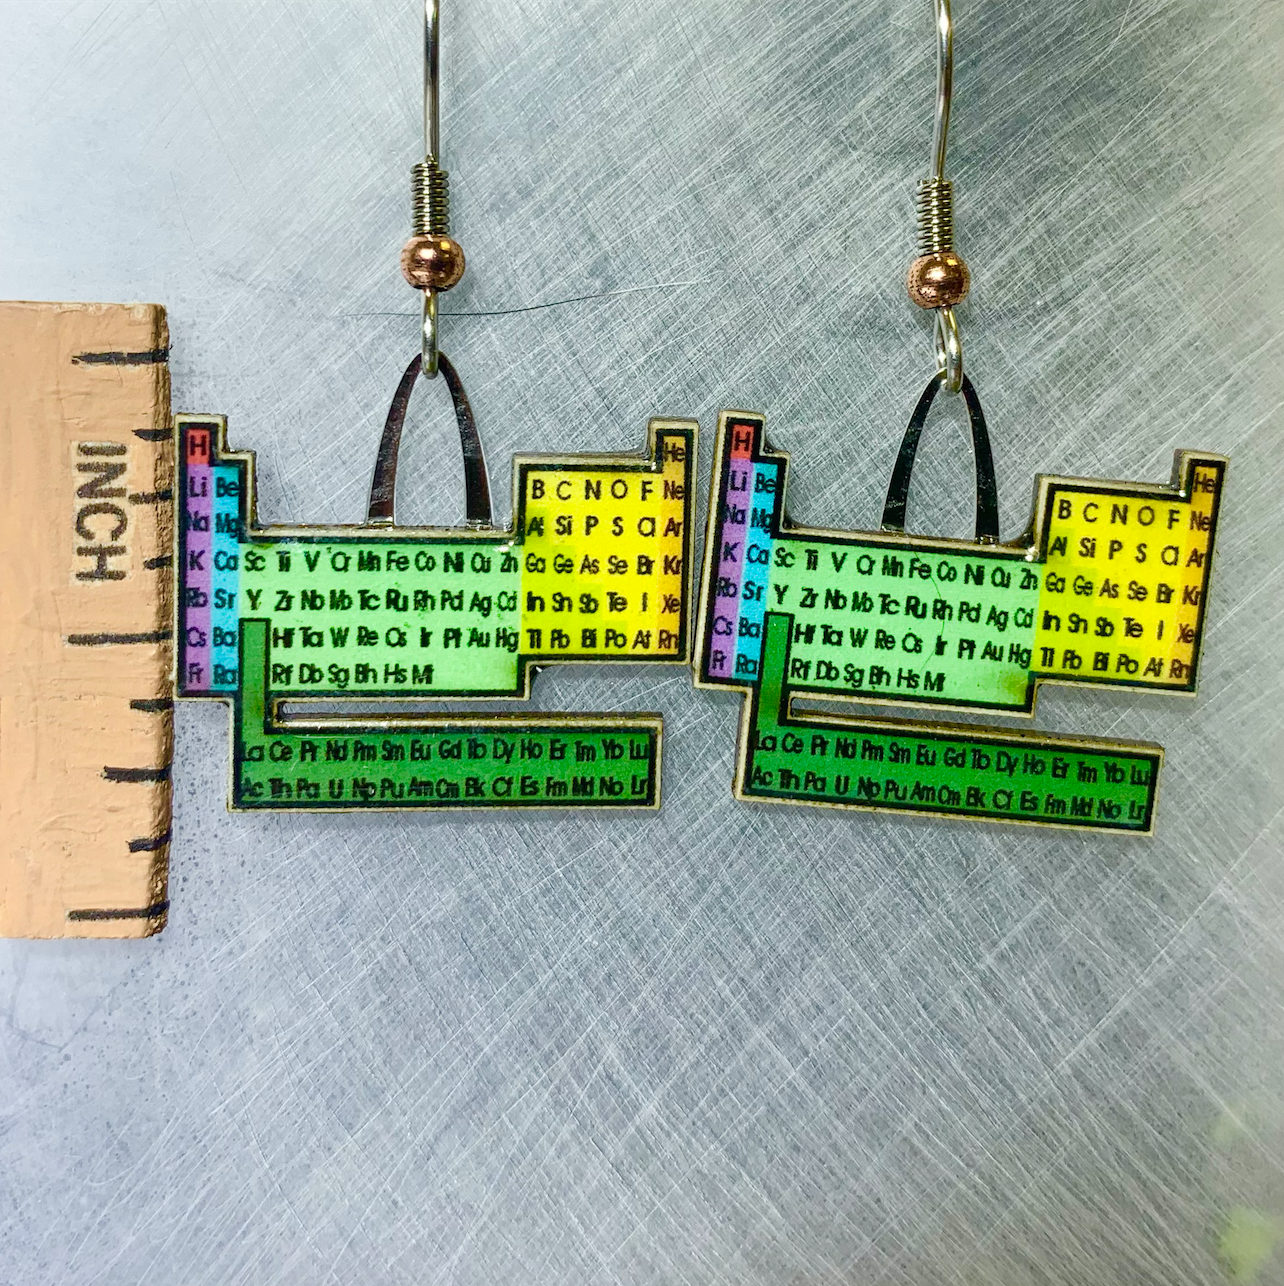 Picture shown is of 1 inch tall pair of earrings of the Periodic Table.